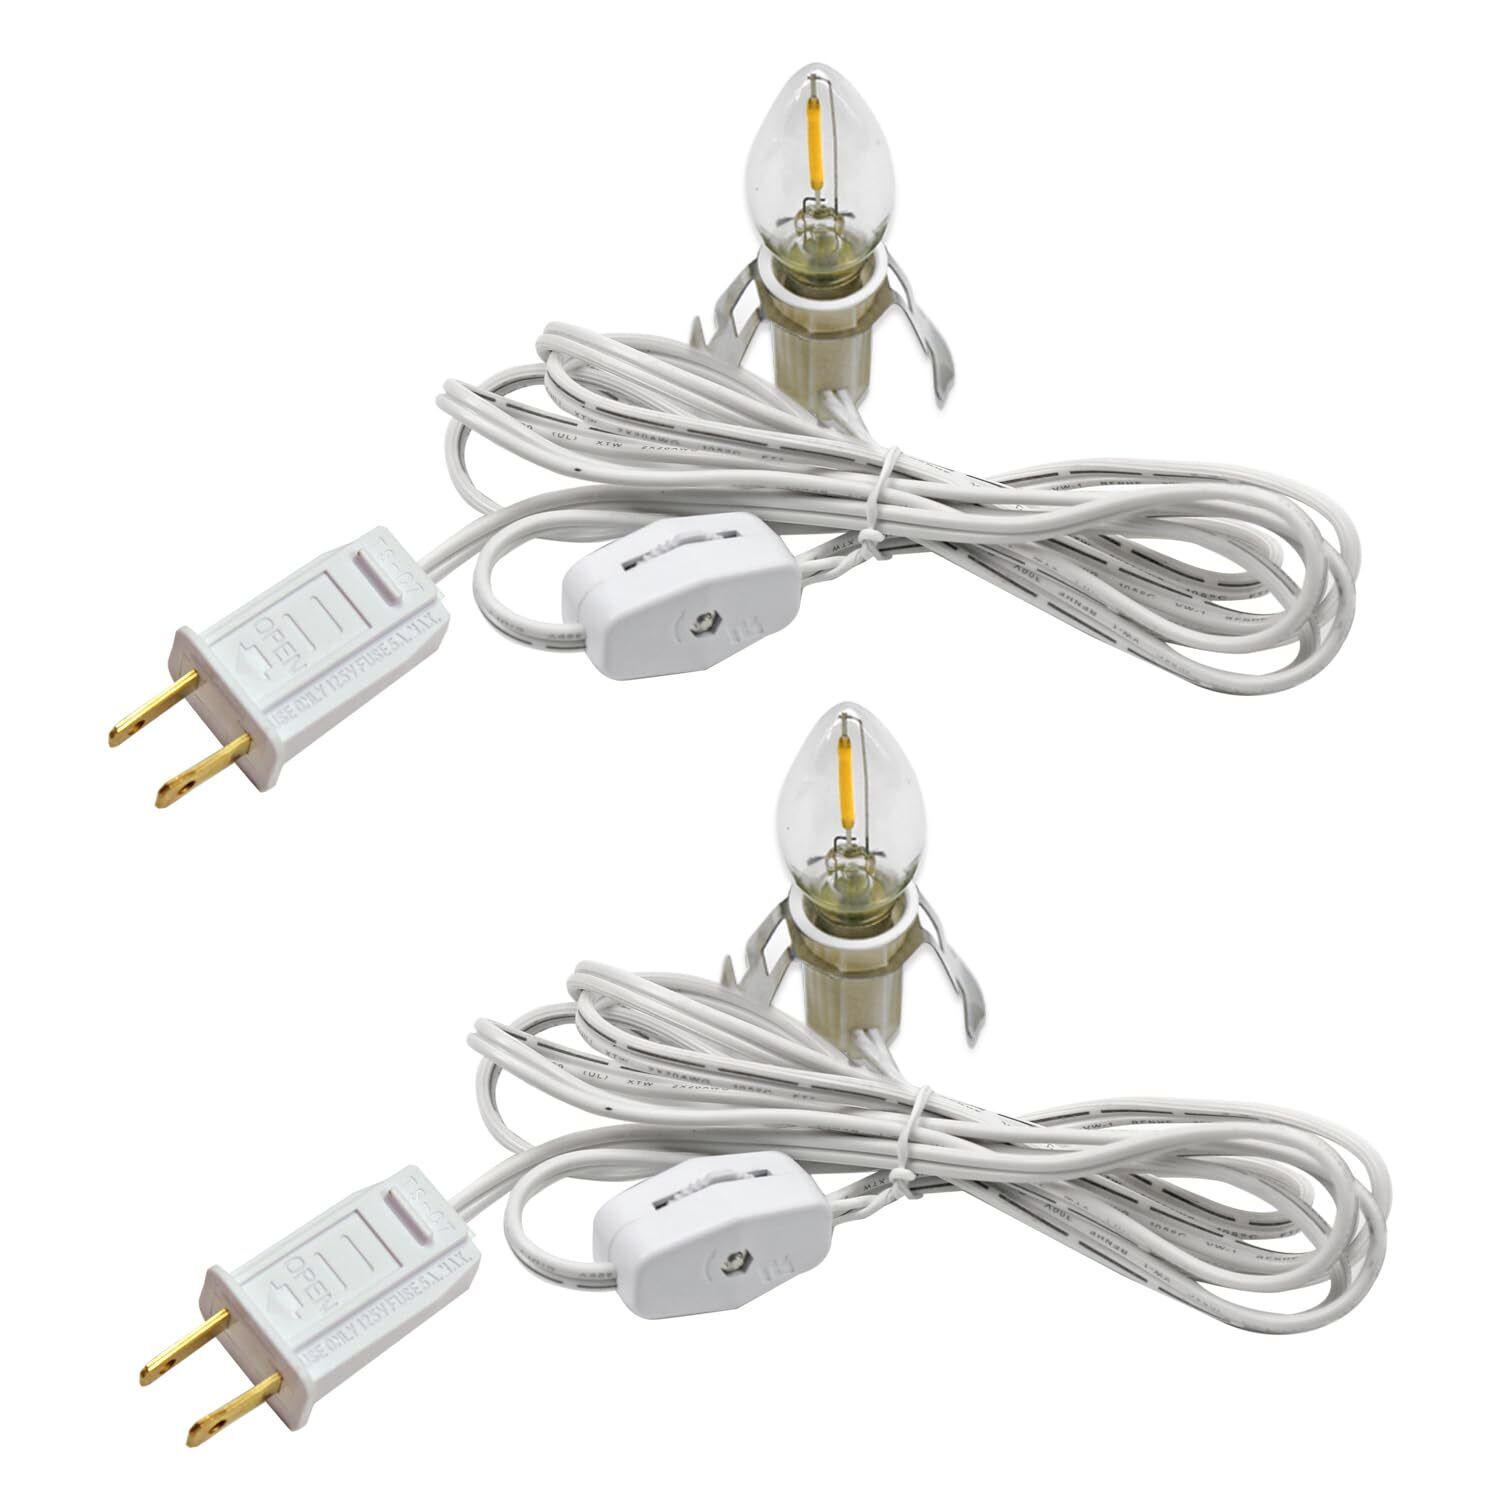 Set Of 2 Accessory Cord With 2 Led Light Bulb 6 Ft White Cord With On/off Switch